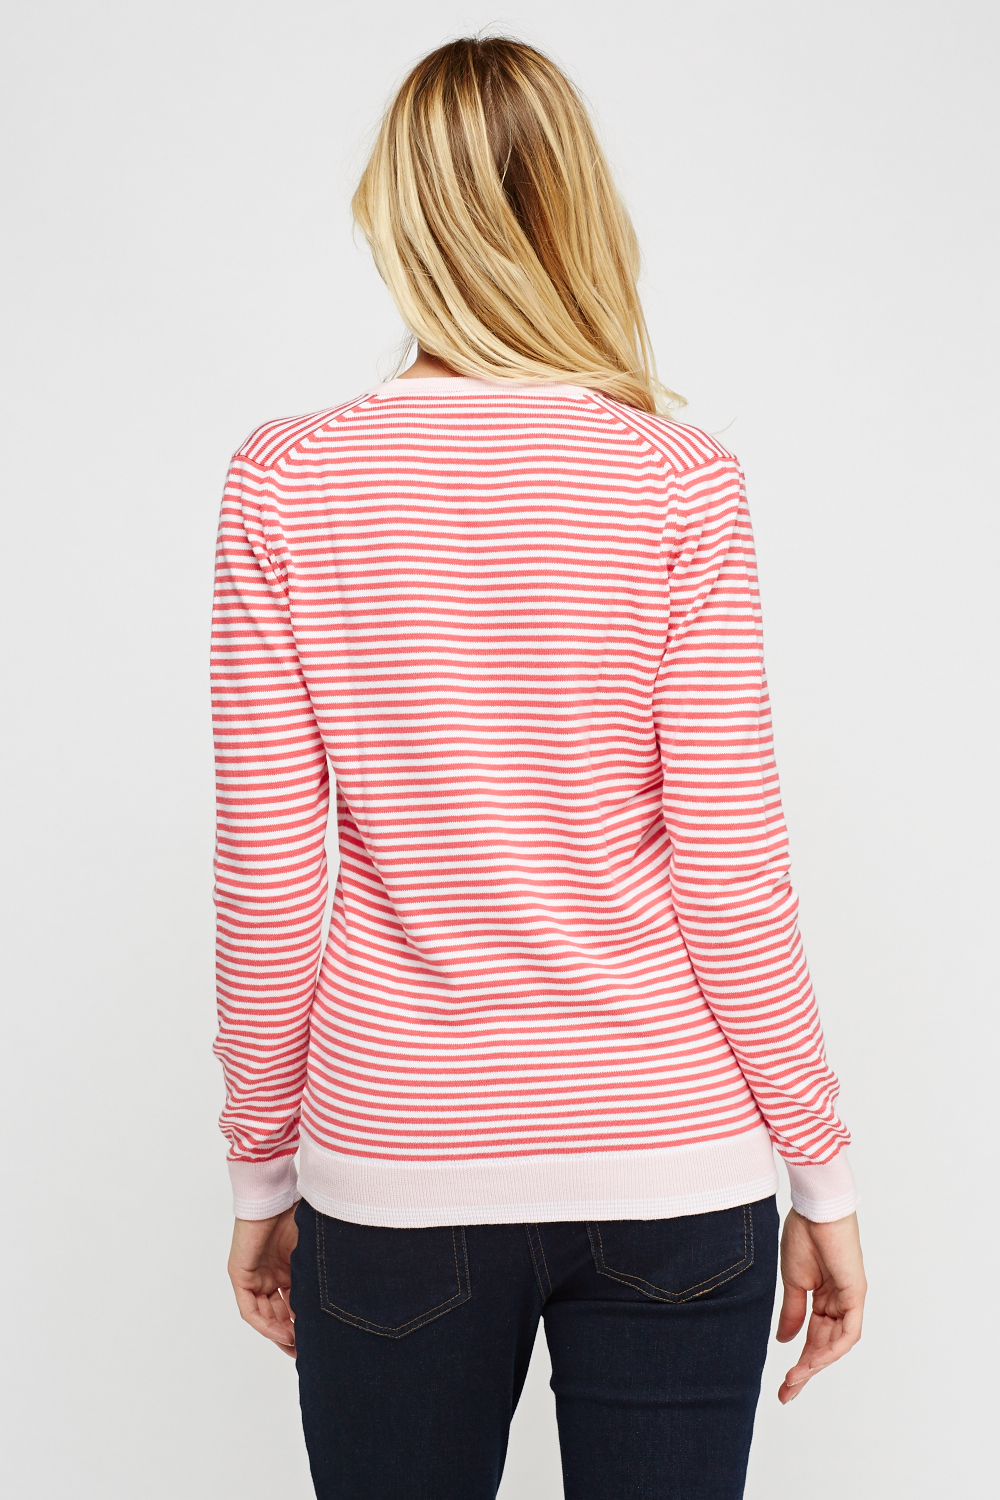 Lacoste Pink Striped V-Neck Sweater - Limited edition | Discount ...